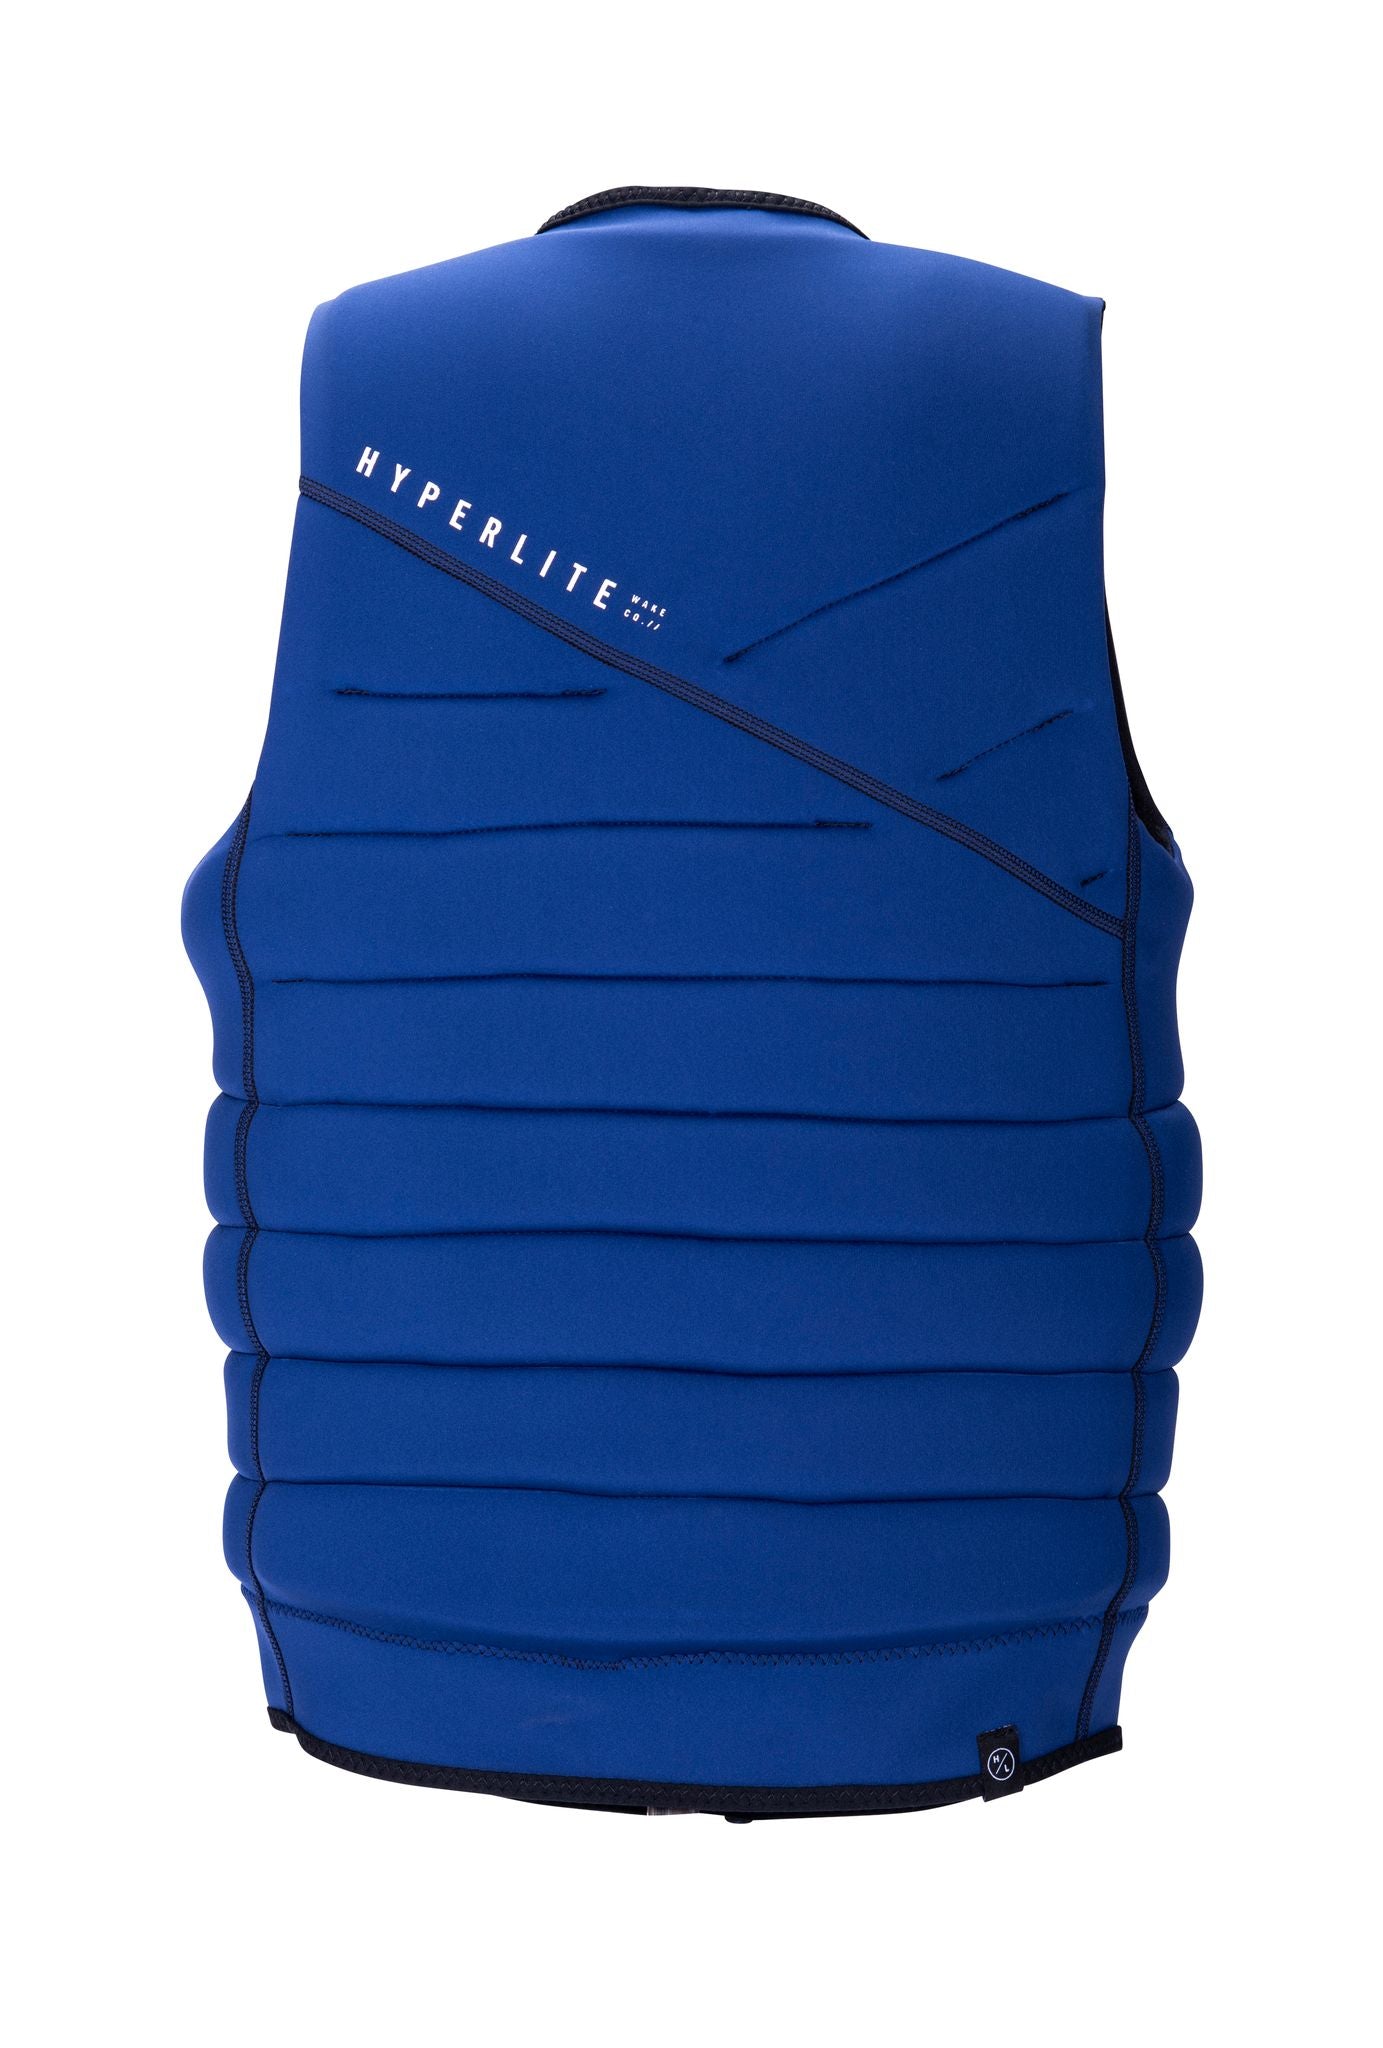 A Hyperlite 2024 NCGA Ripsaw vest with black and blue stripes, perfect for wakeboarders.